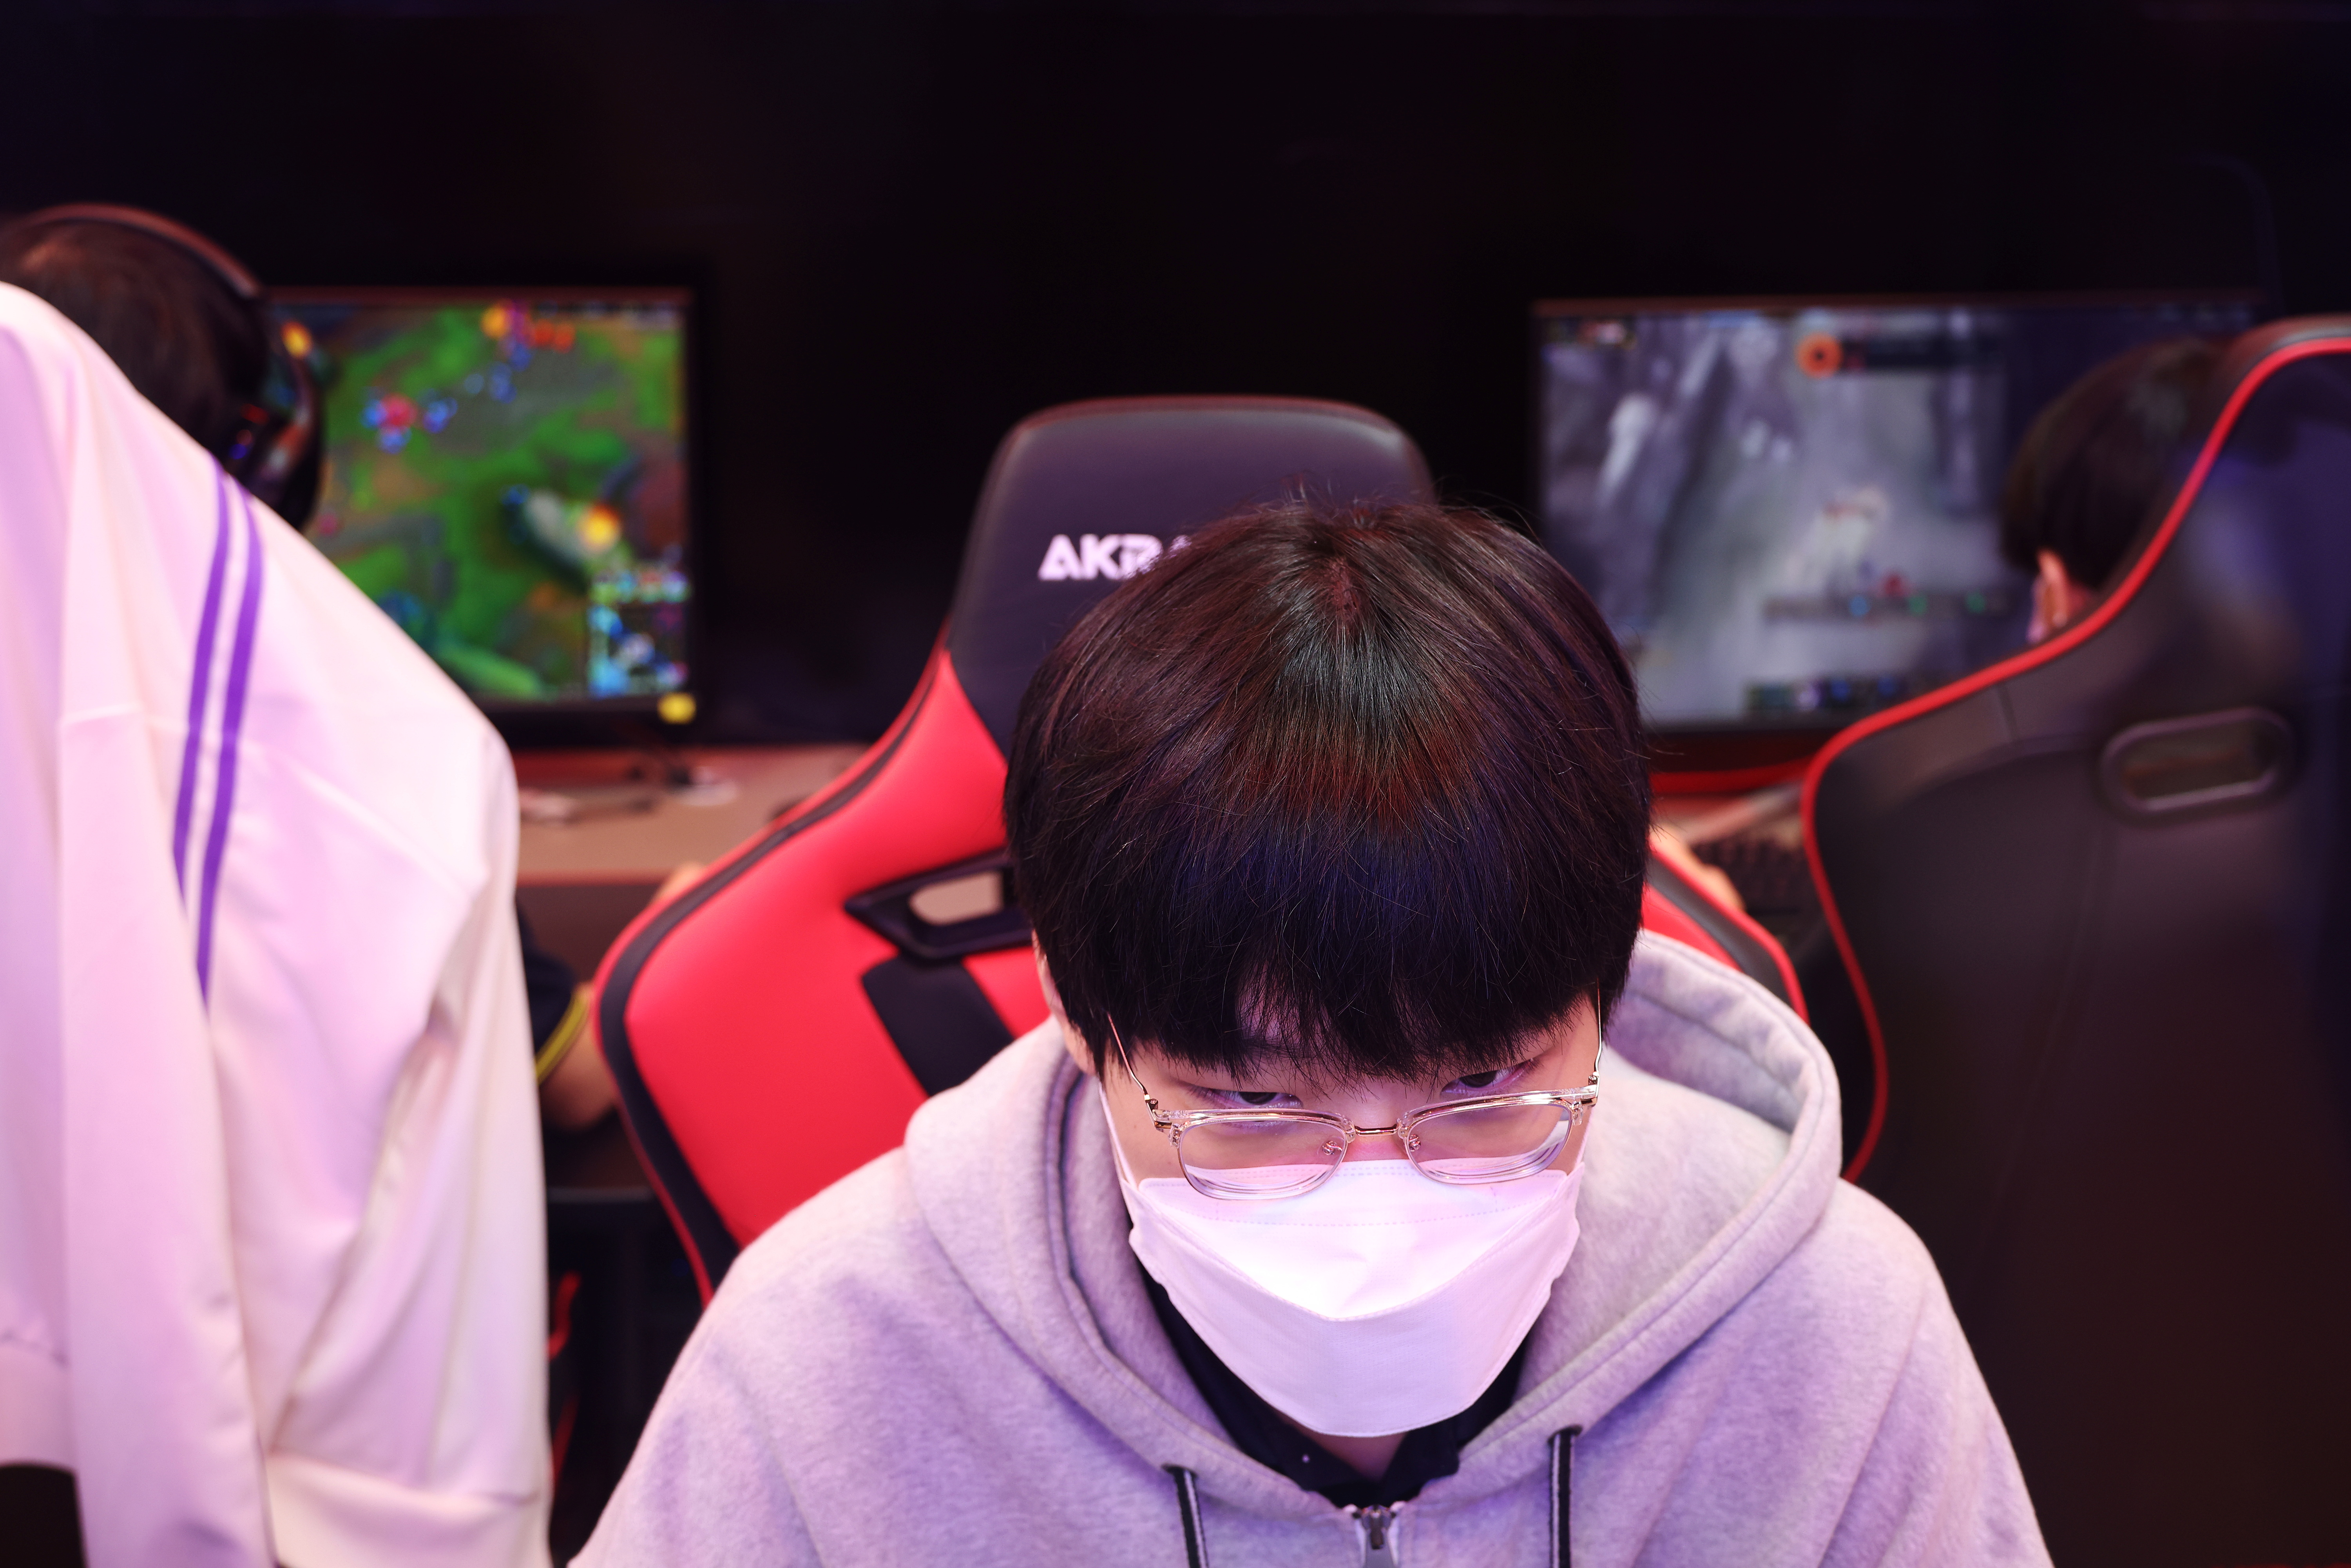 A (complex) network of institutions: Faker, playing League of Legends